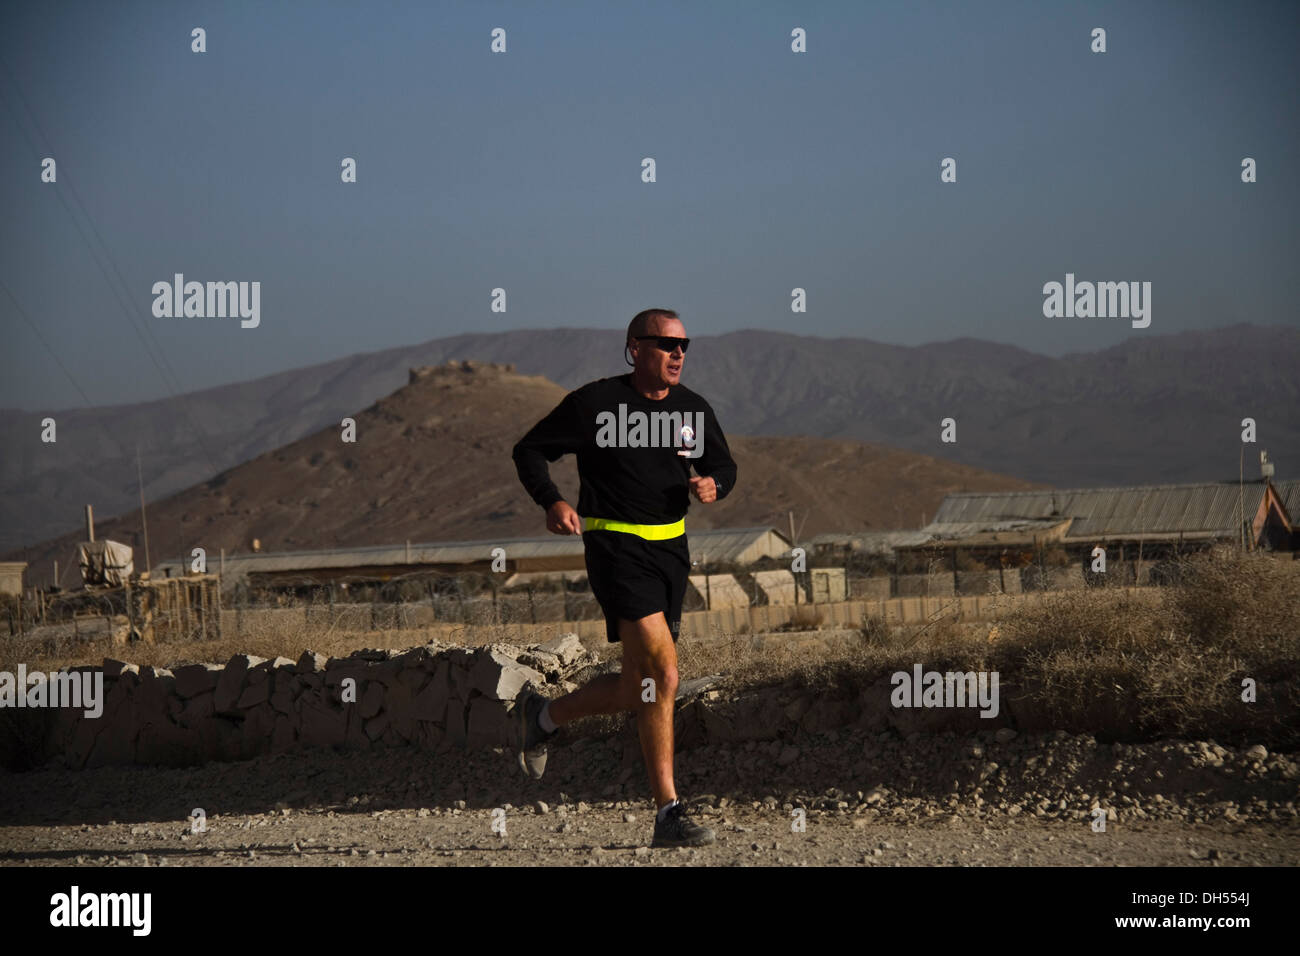 PAKTYA PROVINCE, Afghanistan – A U.S. Army Soldier with 1st Battalion, 506th Infantry Regiment, 4th Brigade Combat Team, 101st Airborne Division (Air Assault), begins his last lap while participating in a Run for the Fallen, Oct. 26, 2013. Stock Photo